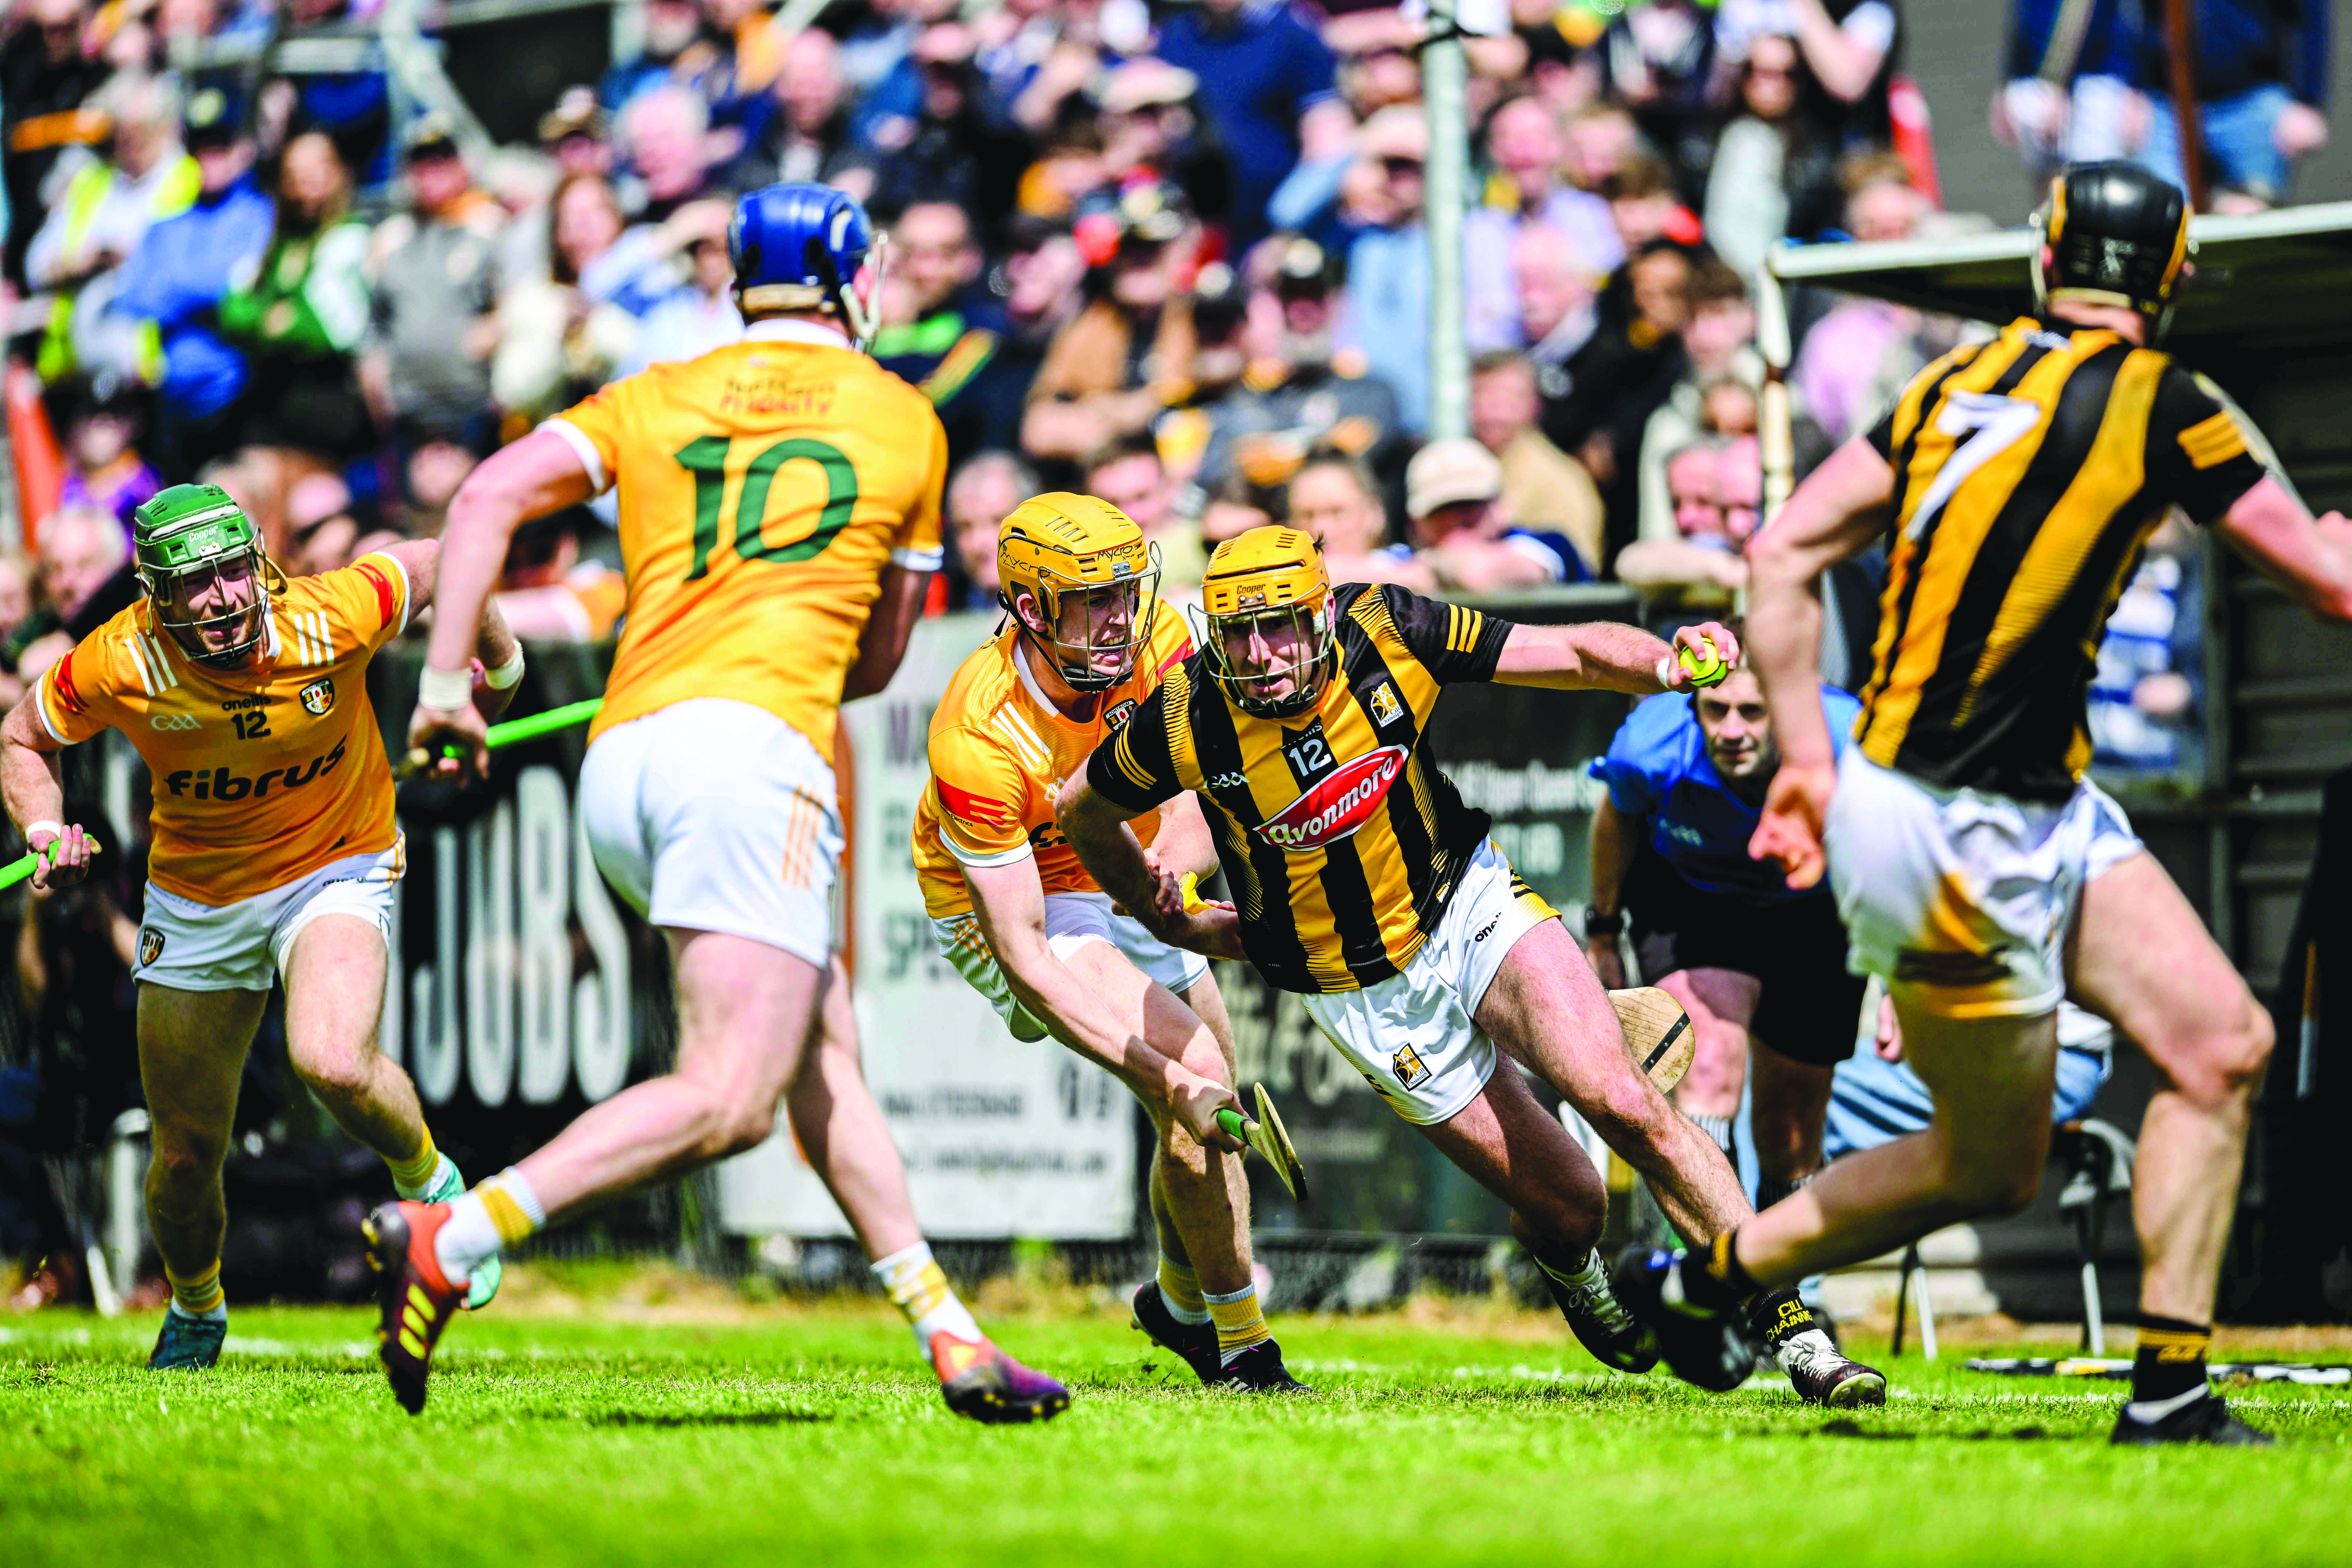 Antrim suffered a heavy loss to Kilkenny at Corrigan Park last week and manager Darren Gleeson has challenged his side to make a much better start to give themselves a chance this week